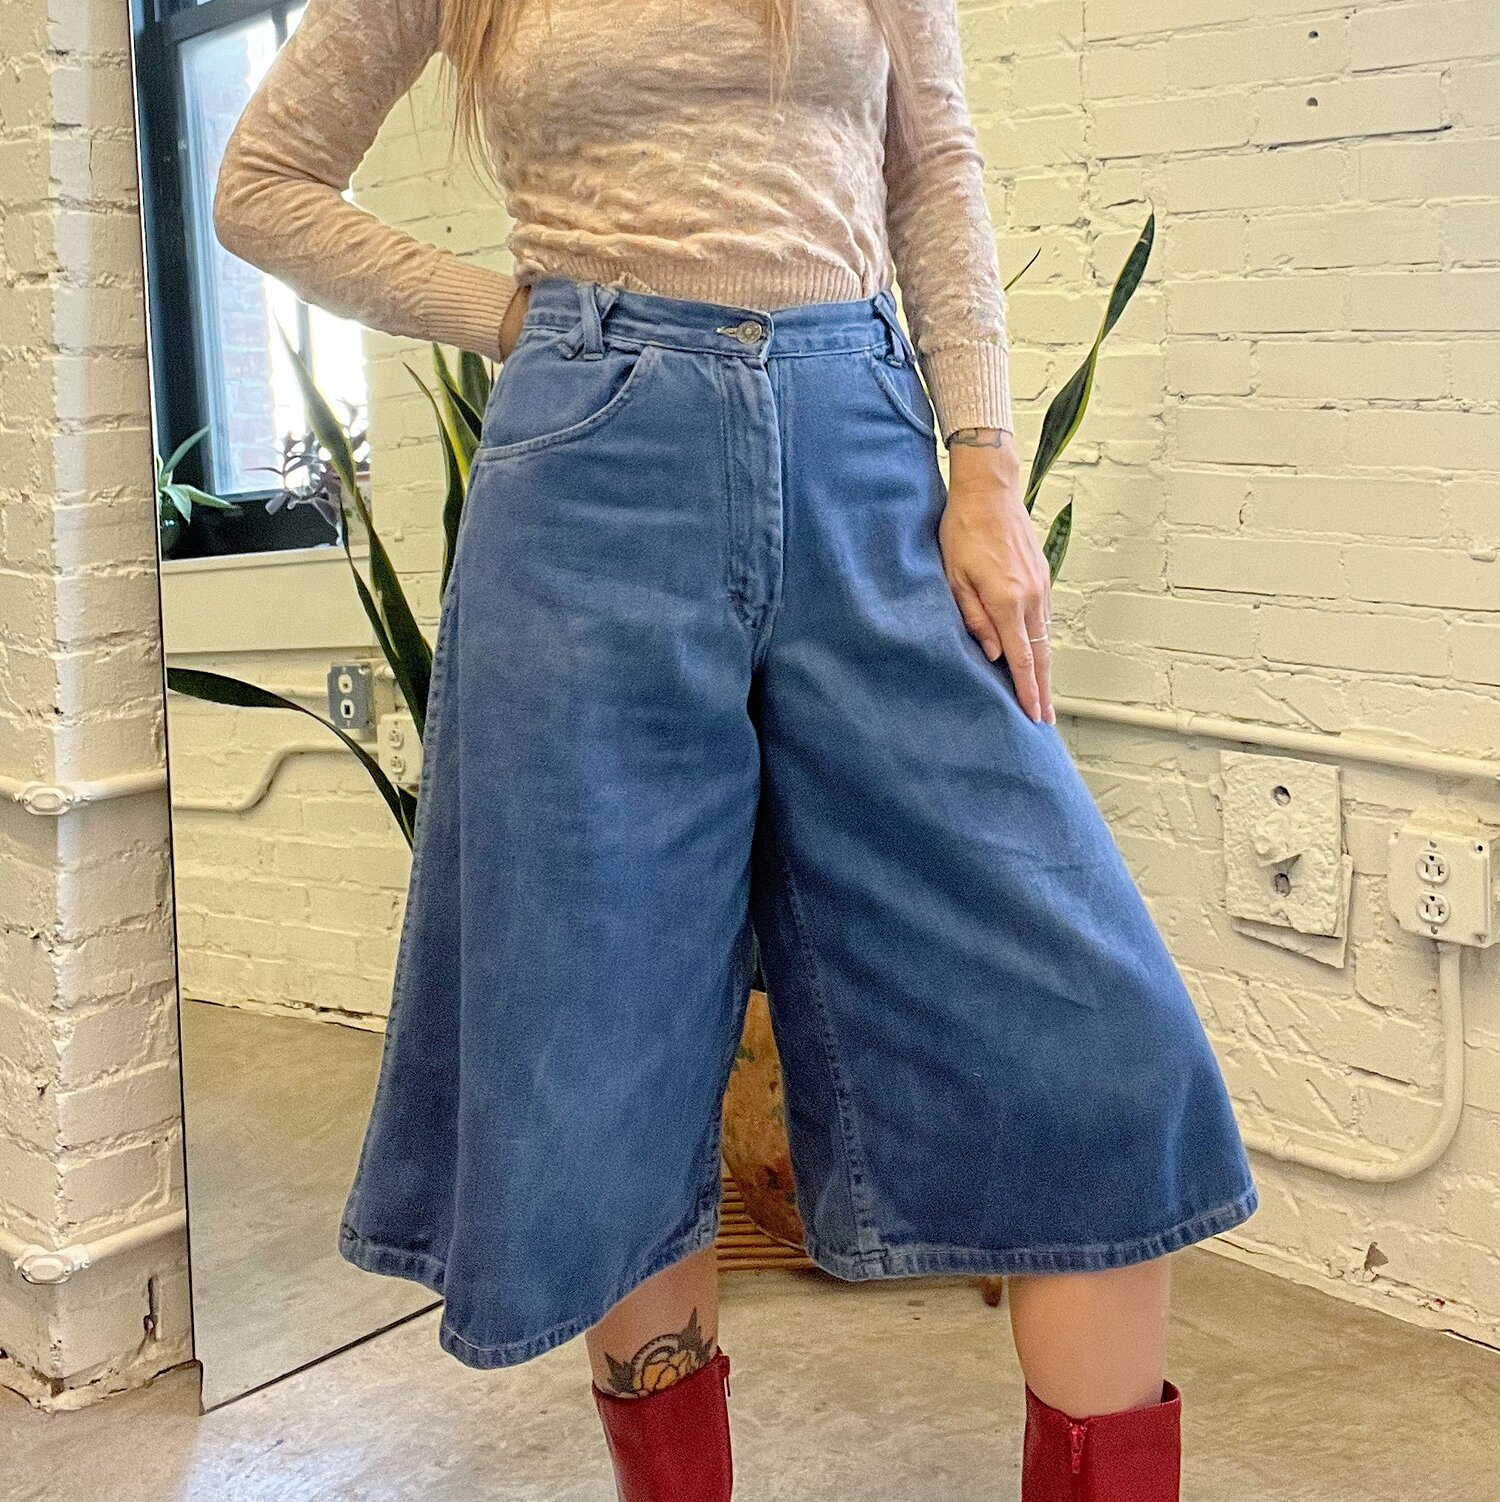 60s/70s Denim Culottes, Size 2 — May's Place: Be Green. Buy Vintage.